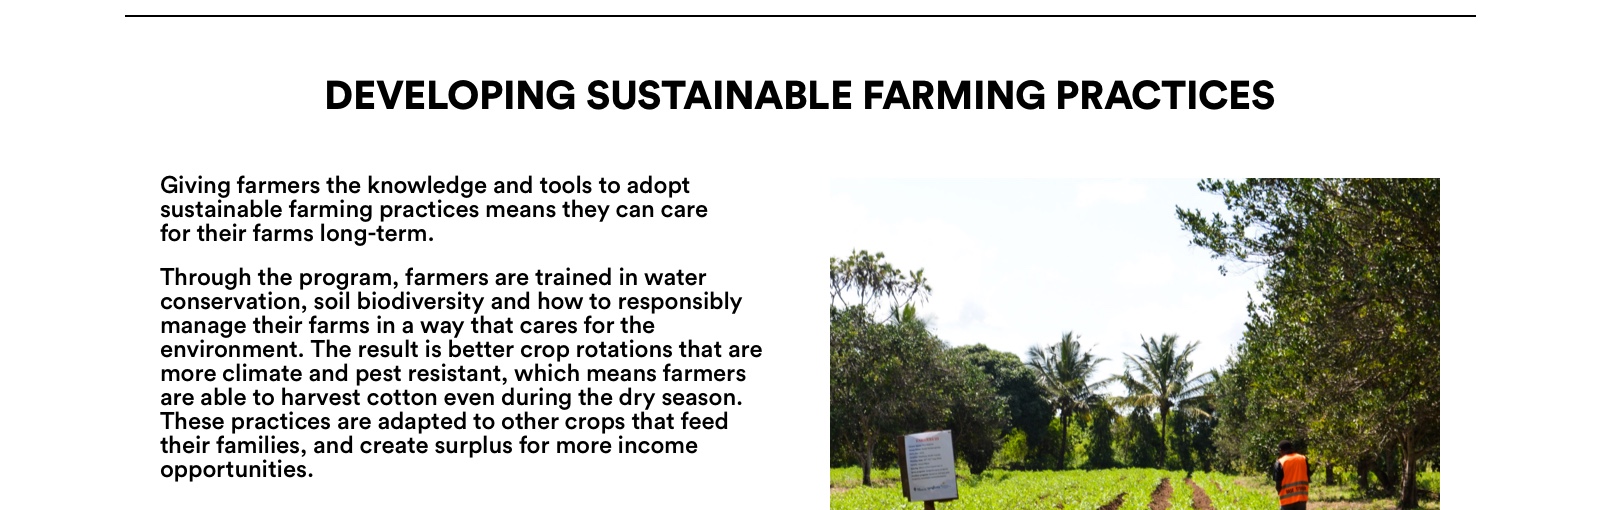 Developing Sustainable Farming Practices. Giving farmers the knowledge and tools to adopt sustainable farming practices means they can care for their farms long-term.